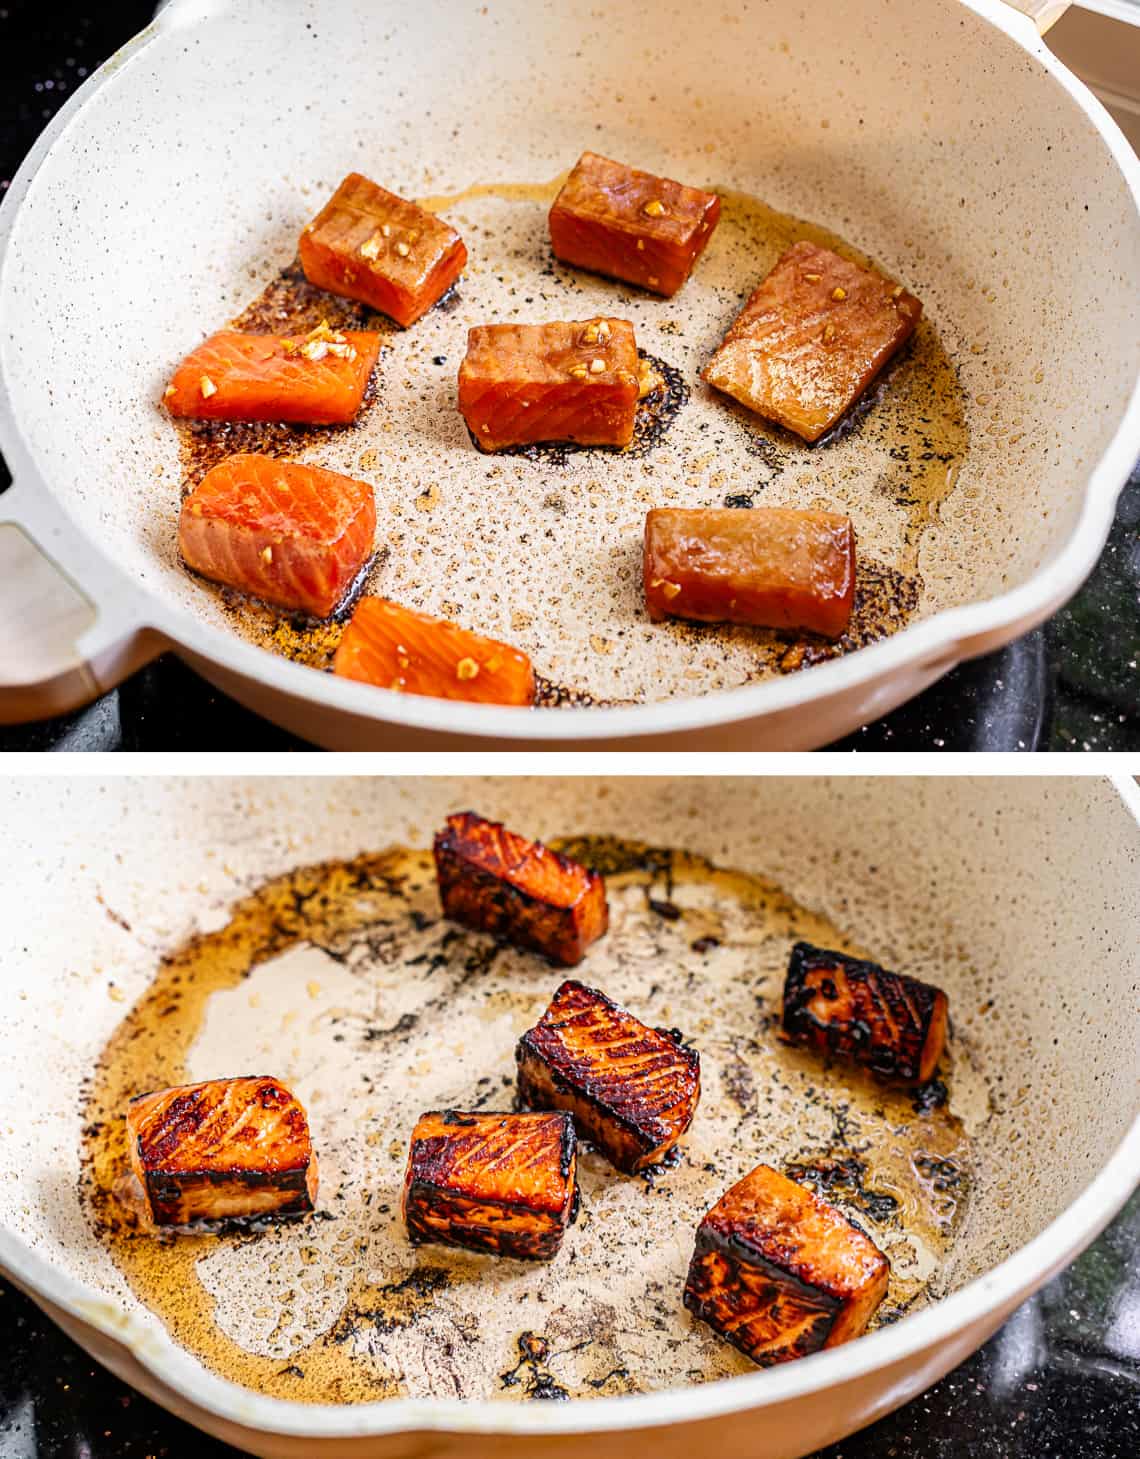 top salmon searing in cast iron pot, bottom same pieces flipped and crispy on the the cooked side.